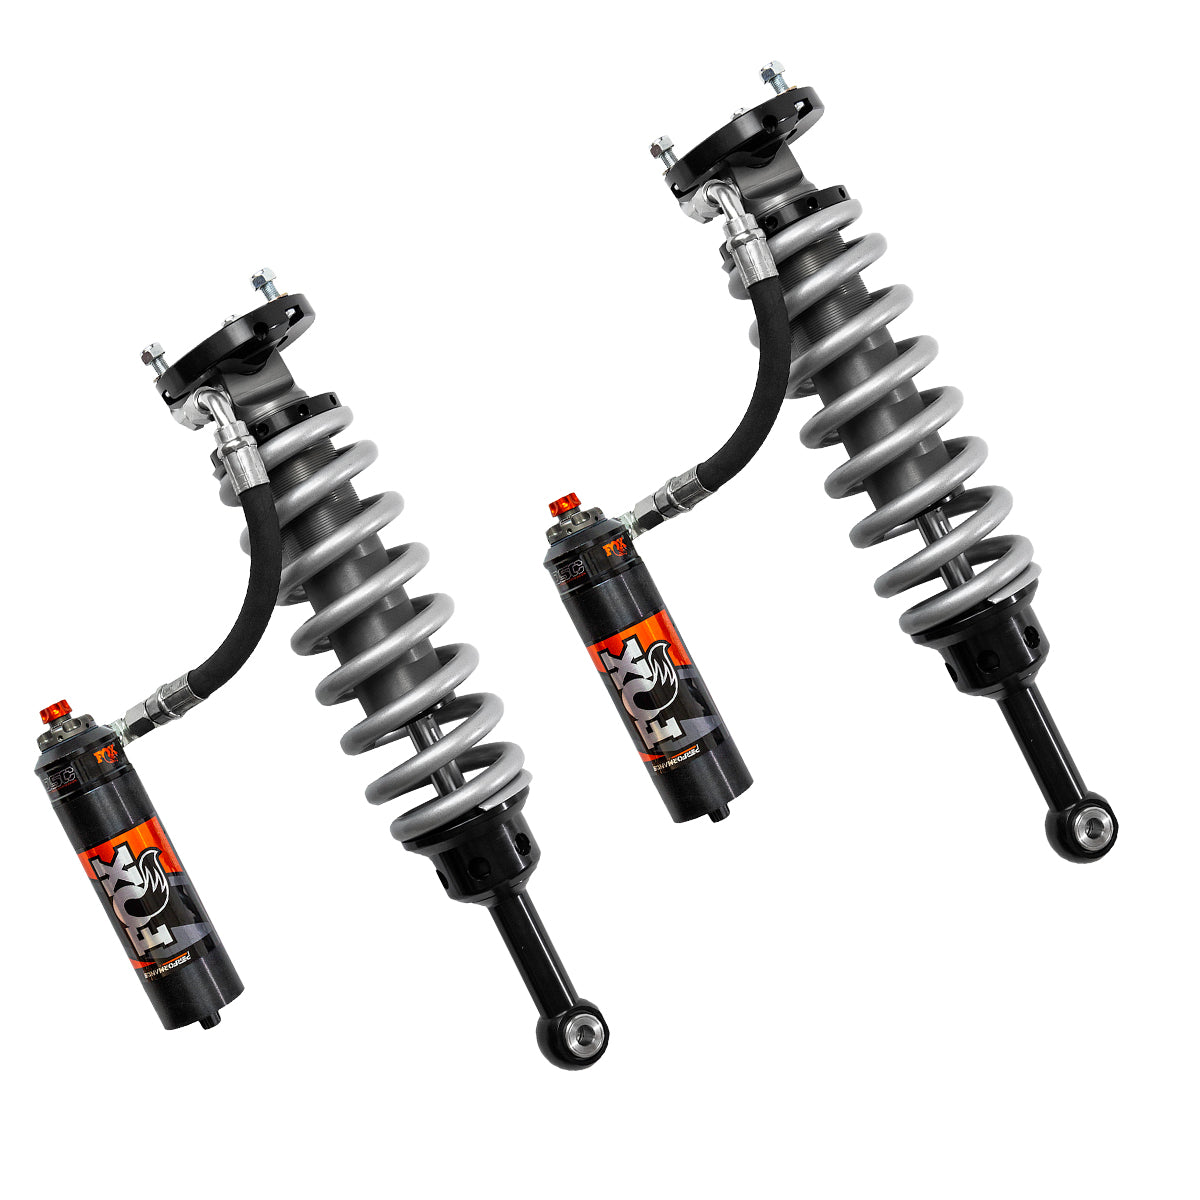 '05-23 Toyota Tacoma Fox Performance Elite Series RR 2.5 Front Coilovers (2-3" Lift) display